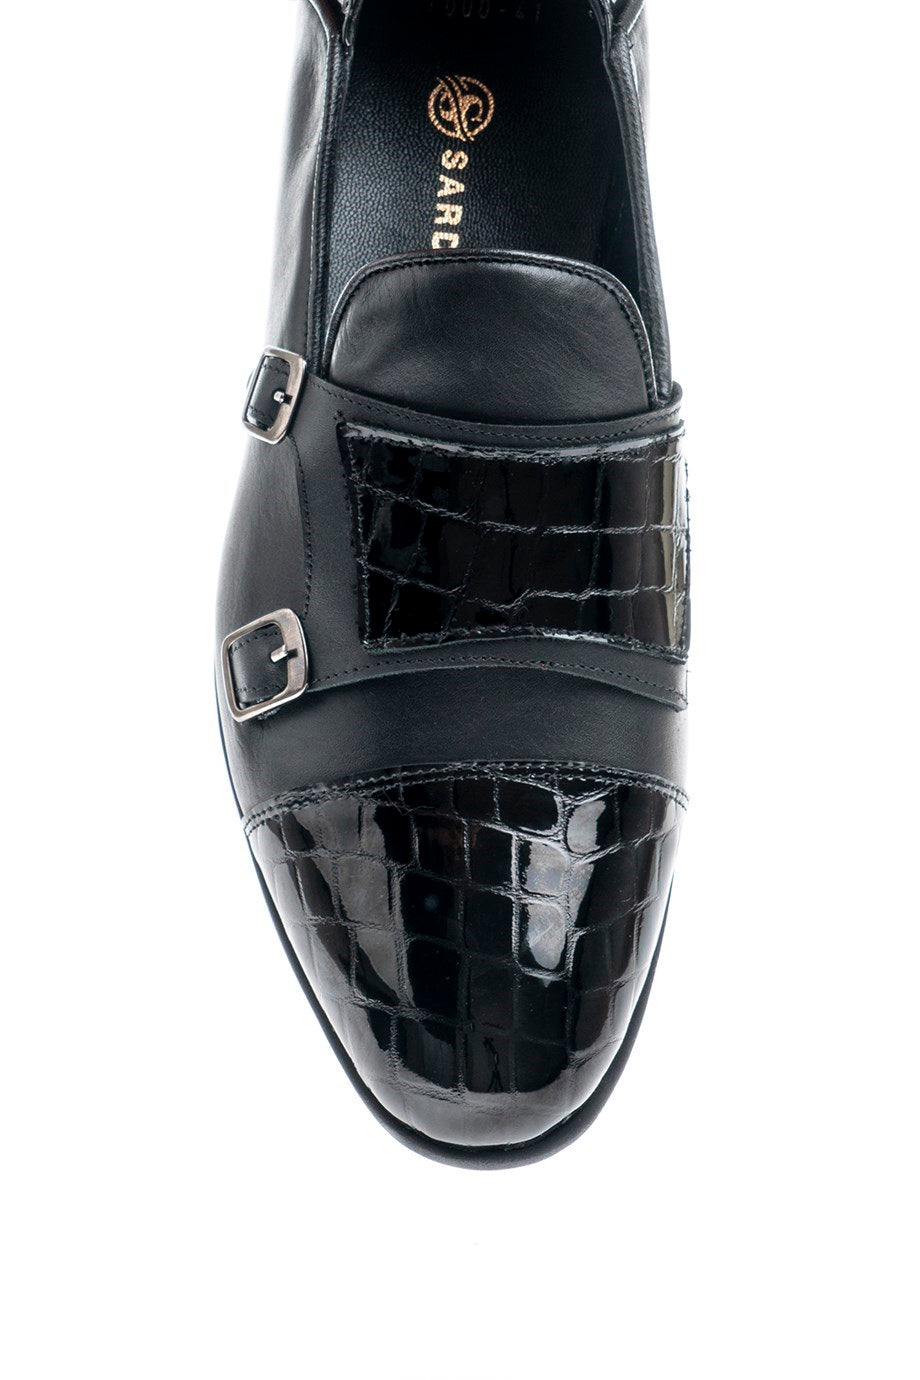 Croco Detail Double Buckled Loafer - MENSTYLEWITH